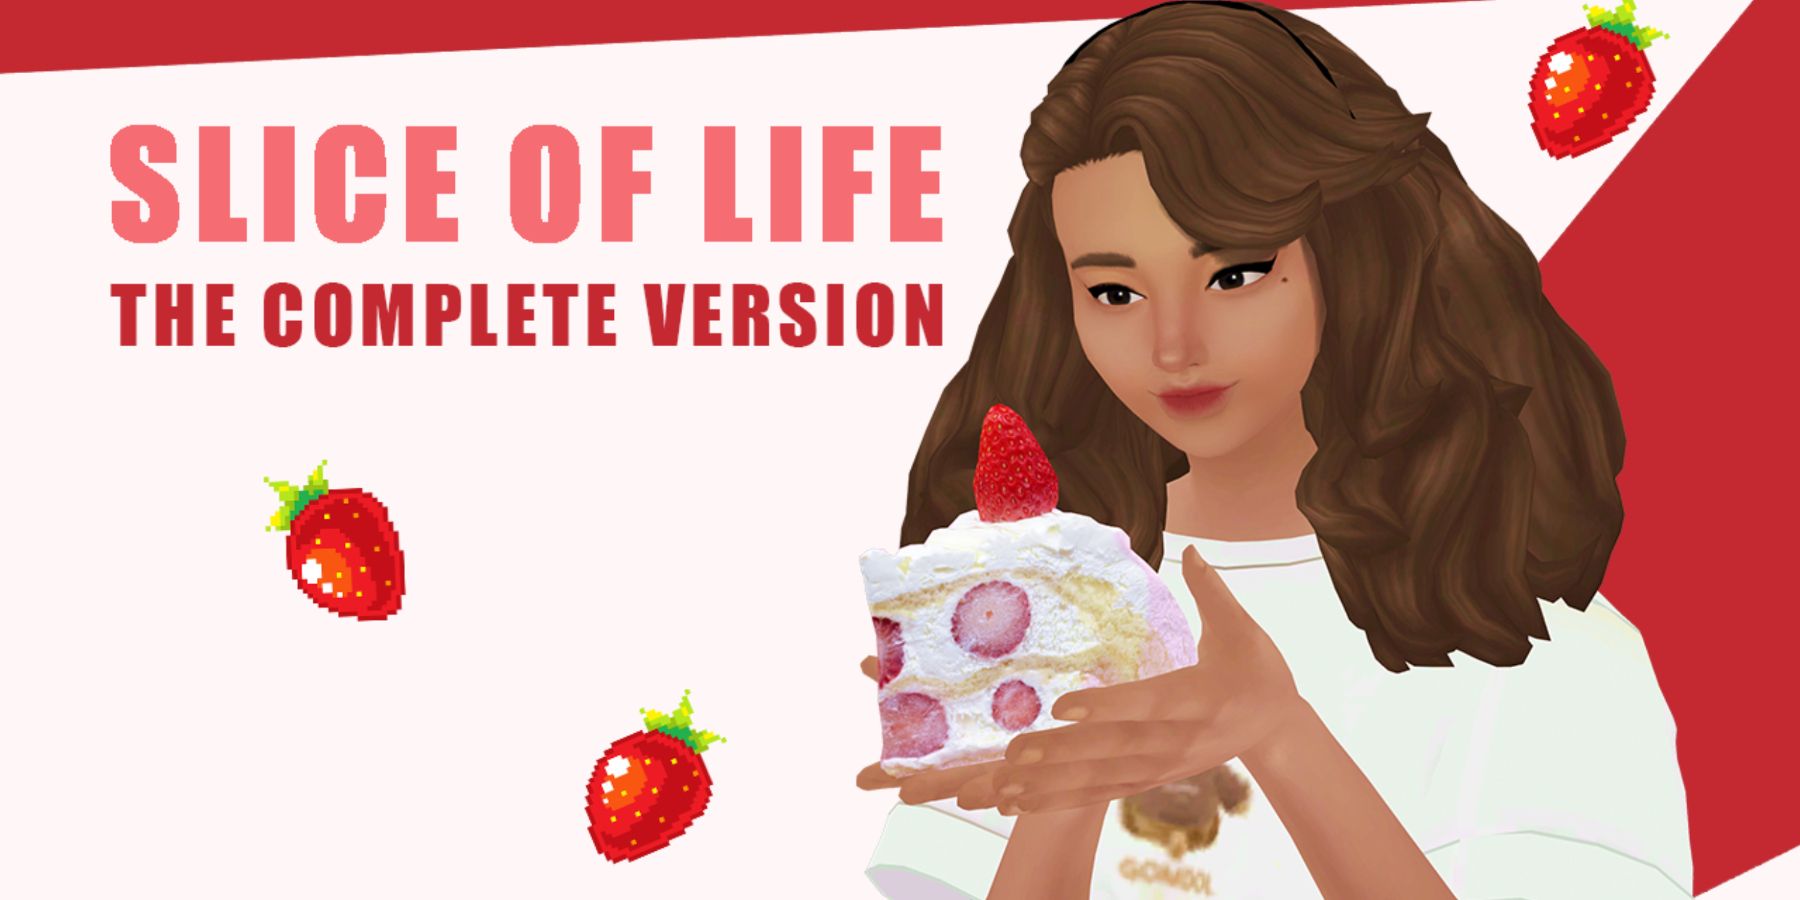 slice of life mod the sims 4